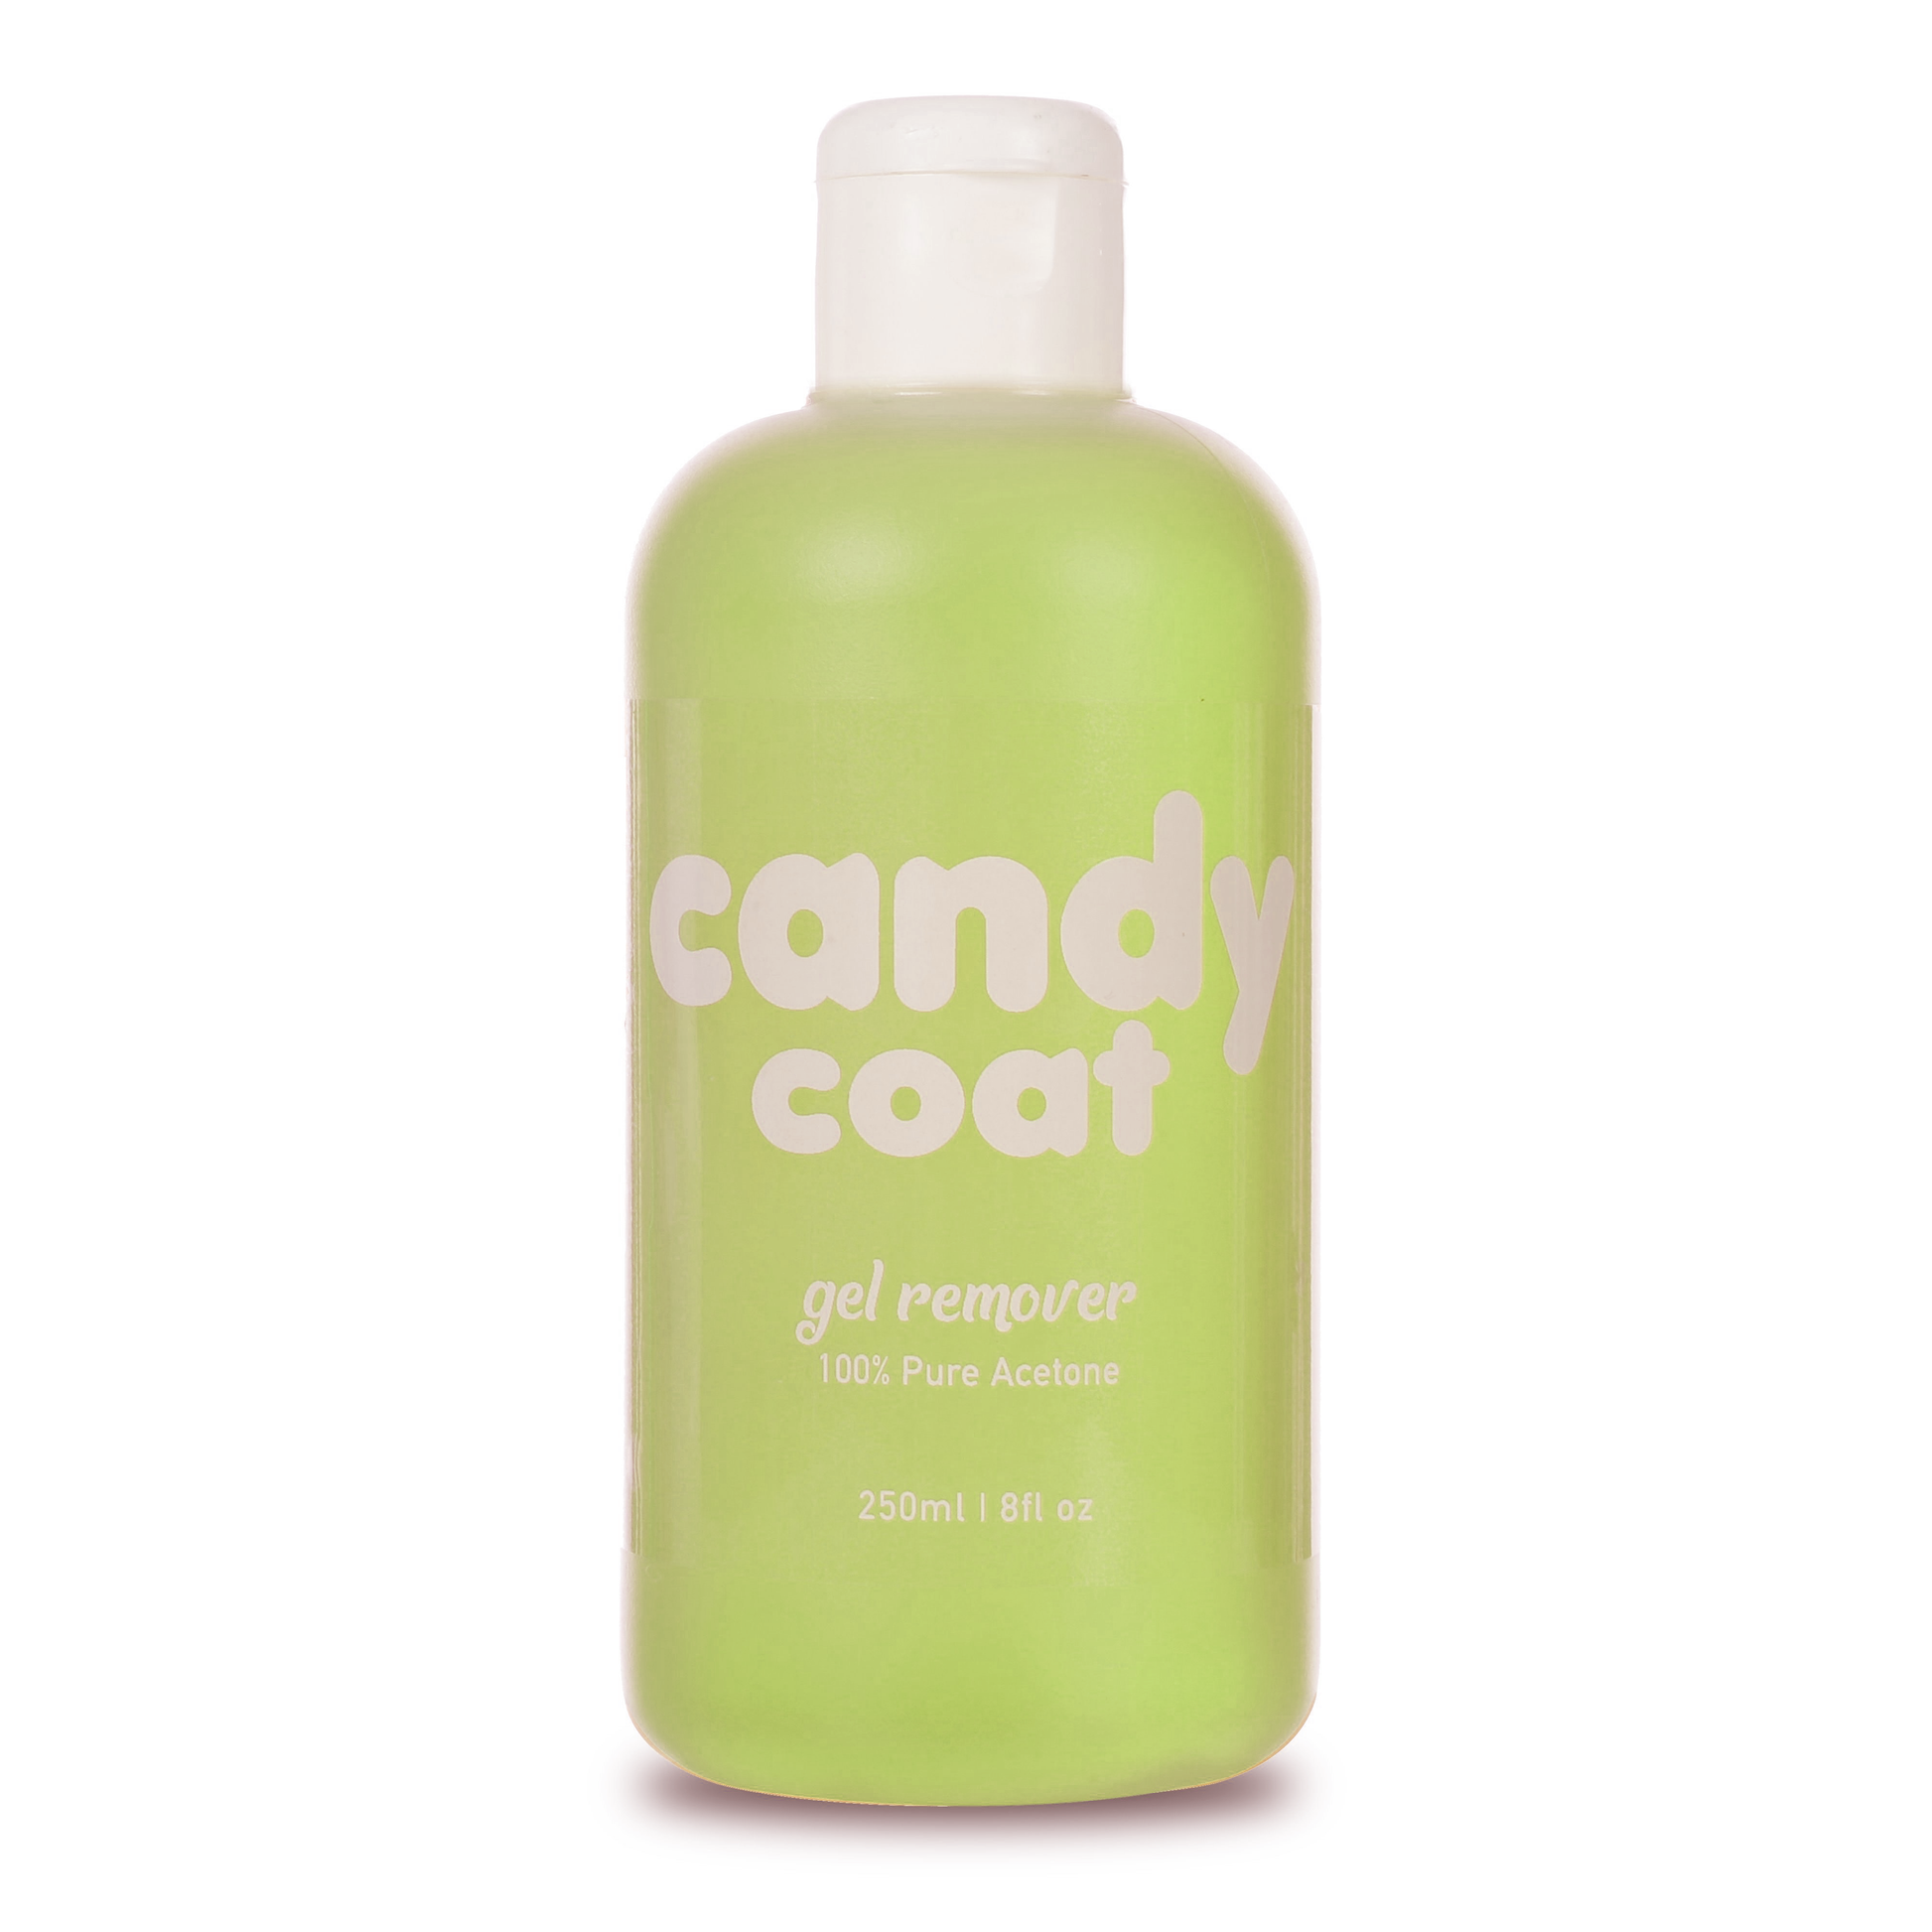 Apple Gel Remover - Candy Coat